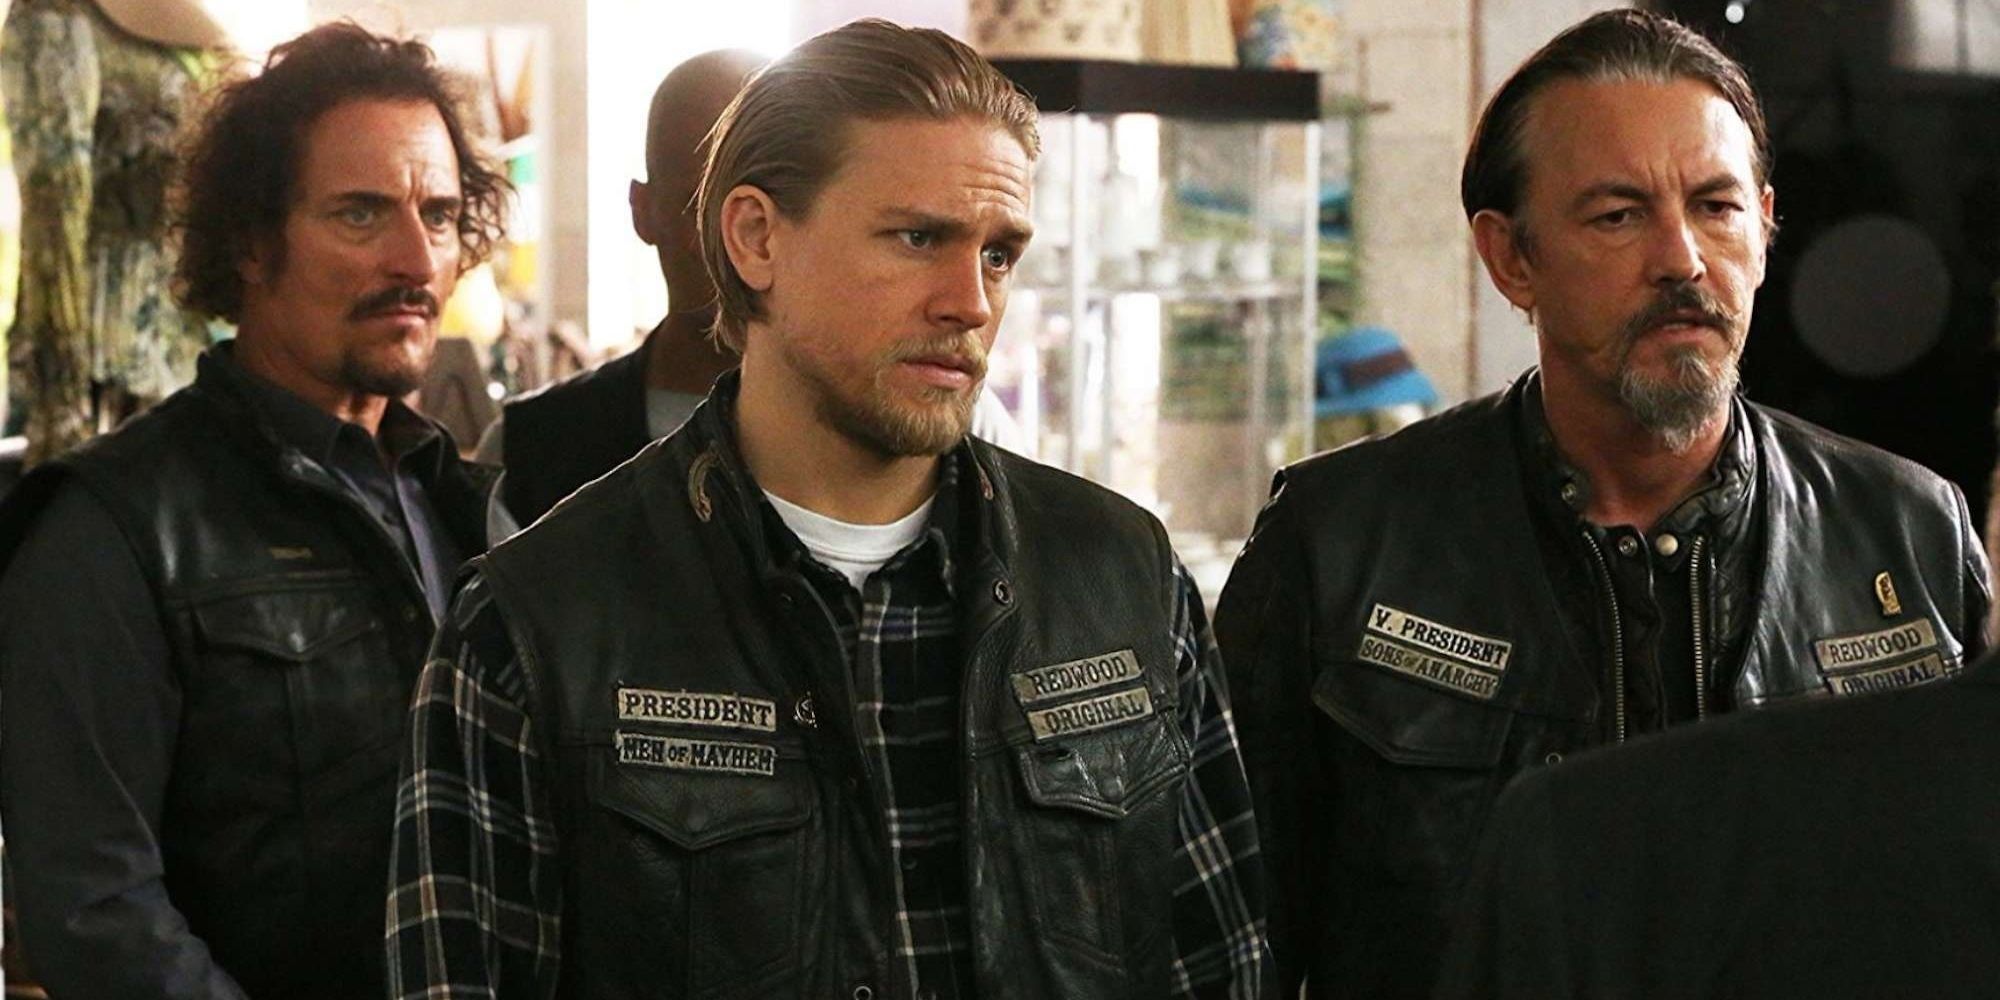 Sons Of Anarchy The 5 Worst Things Tig Trager Ever Did (& 5 That Made Him A Hero)